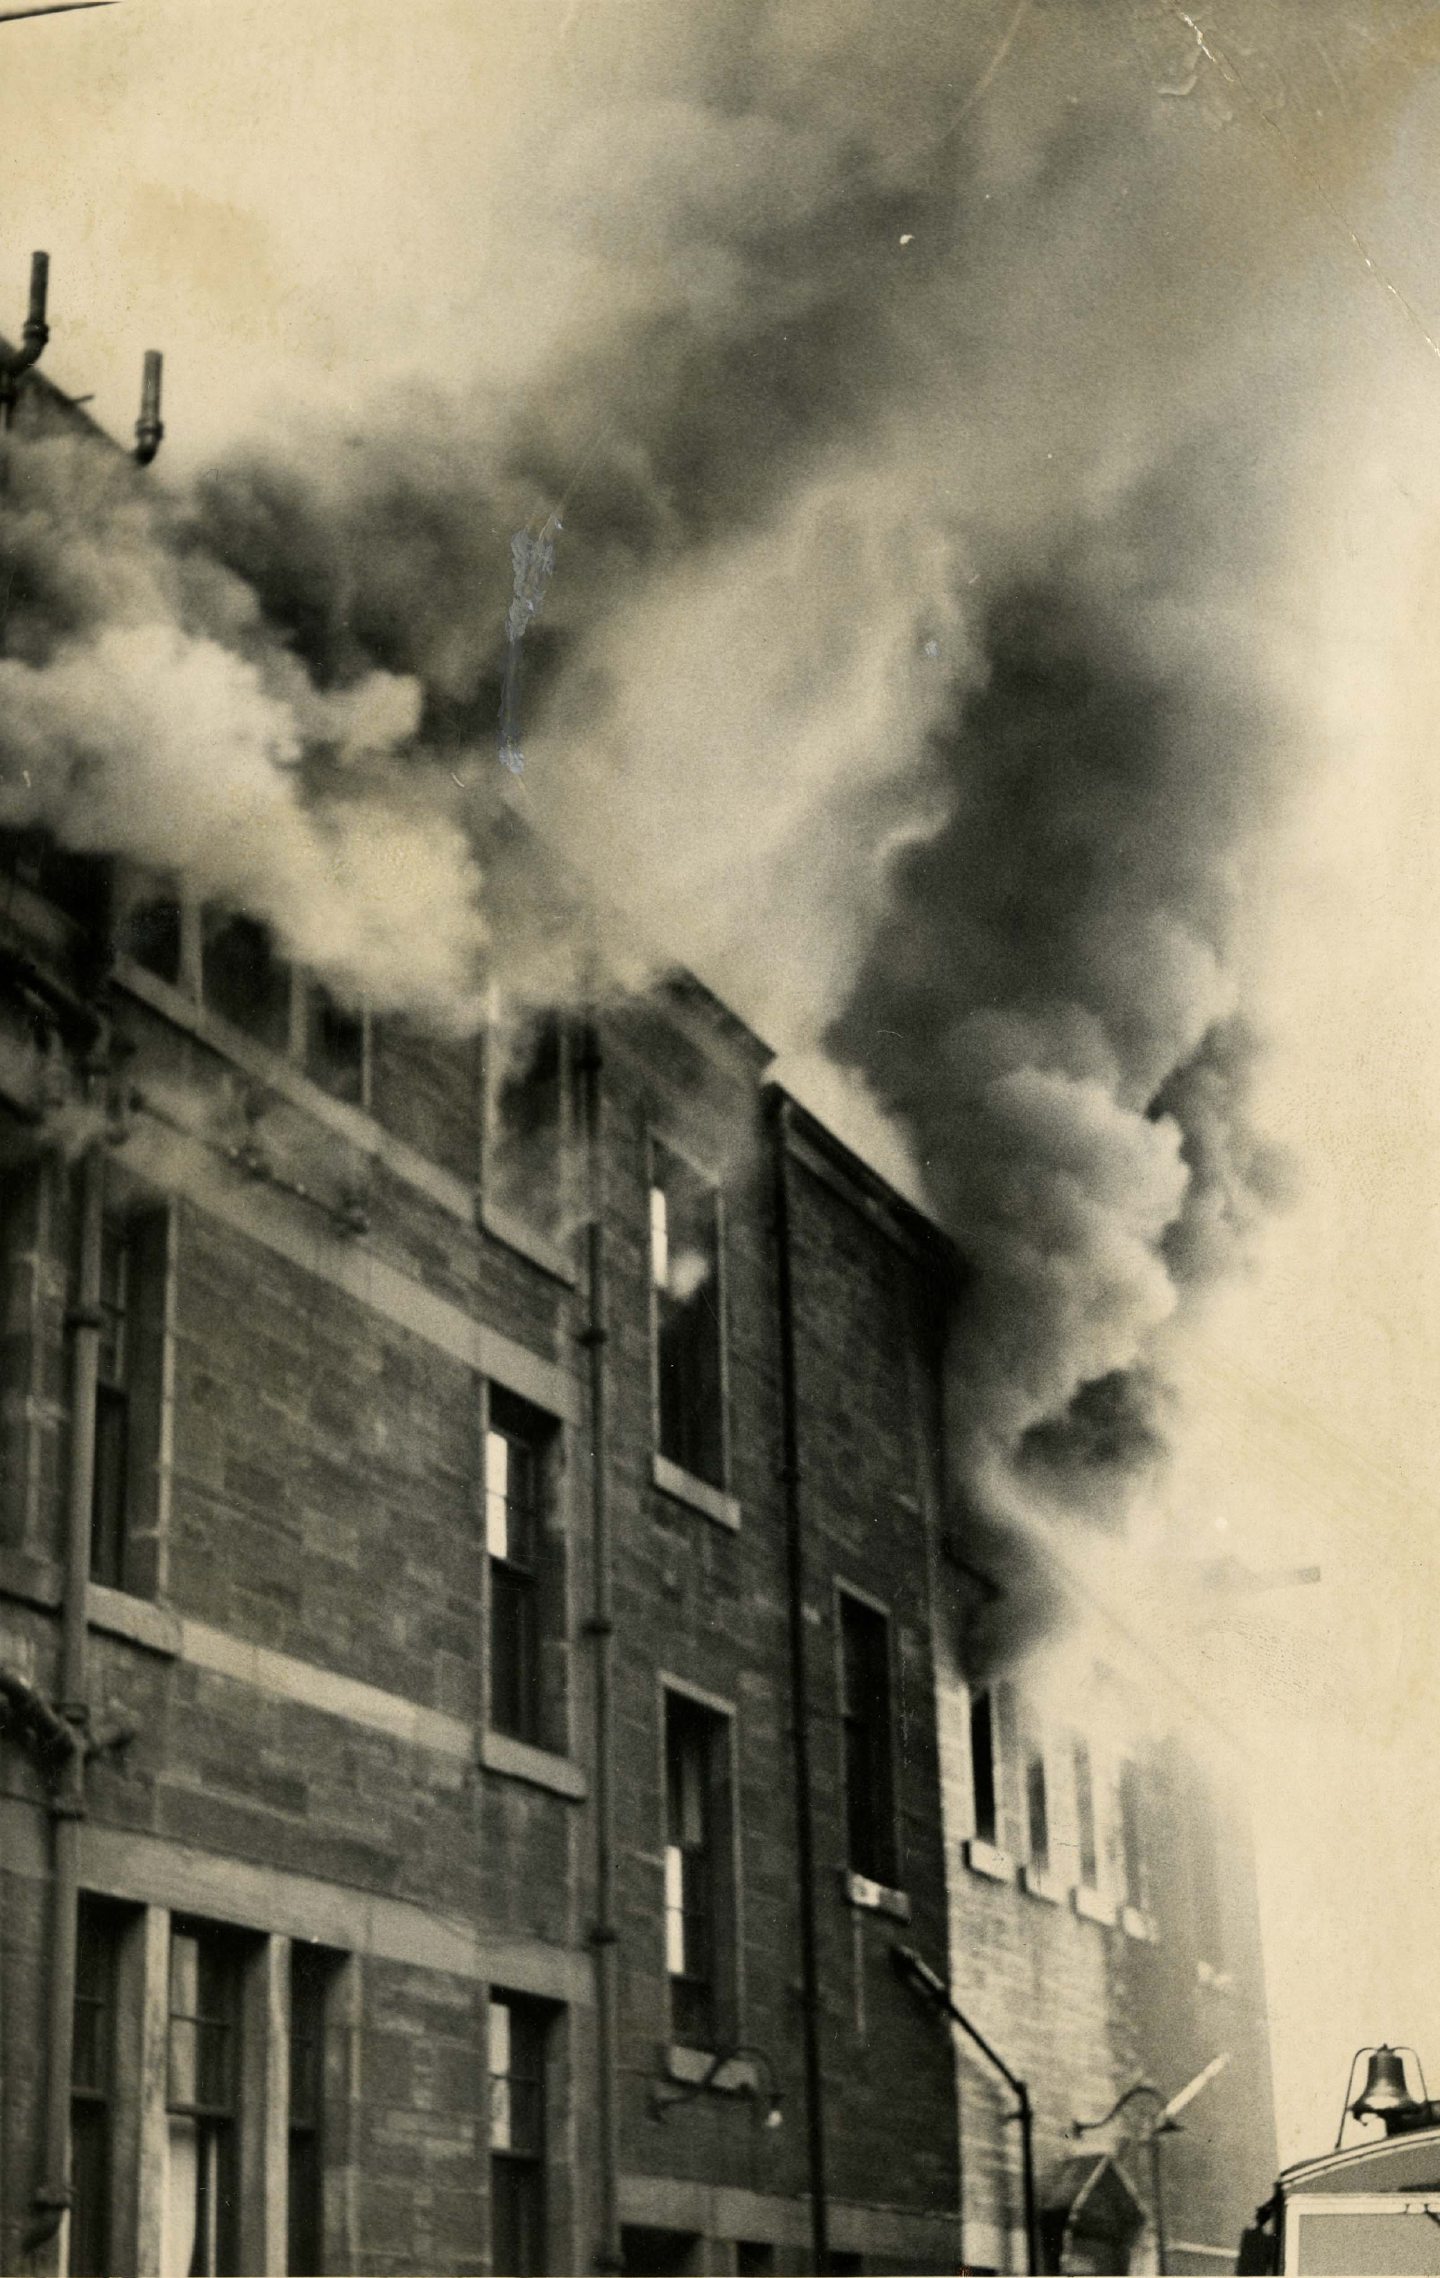 The Rep was engulfed by flames as Davis watched from the pavement. Image: DC Thomson.